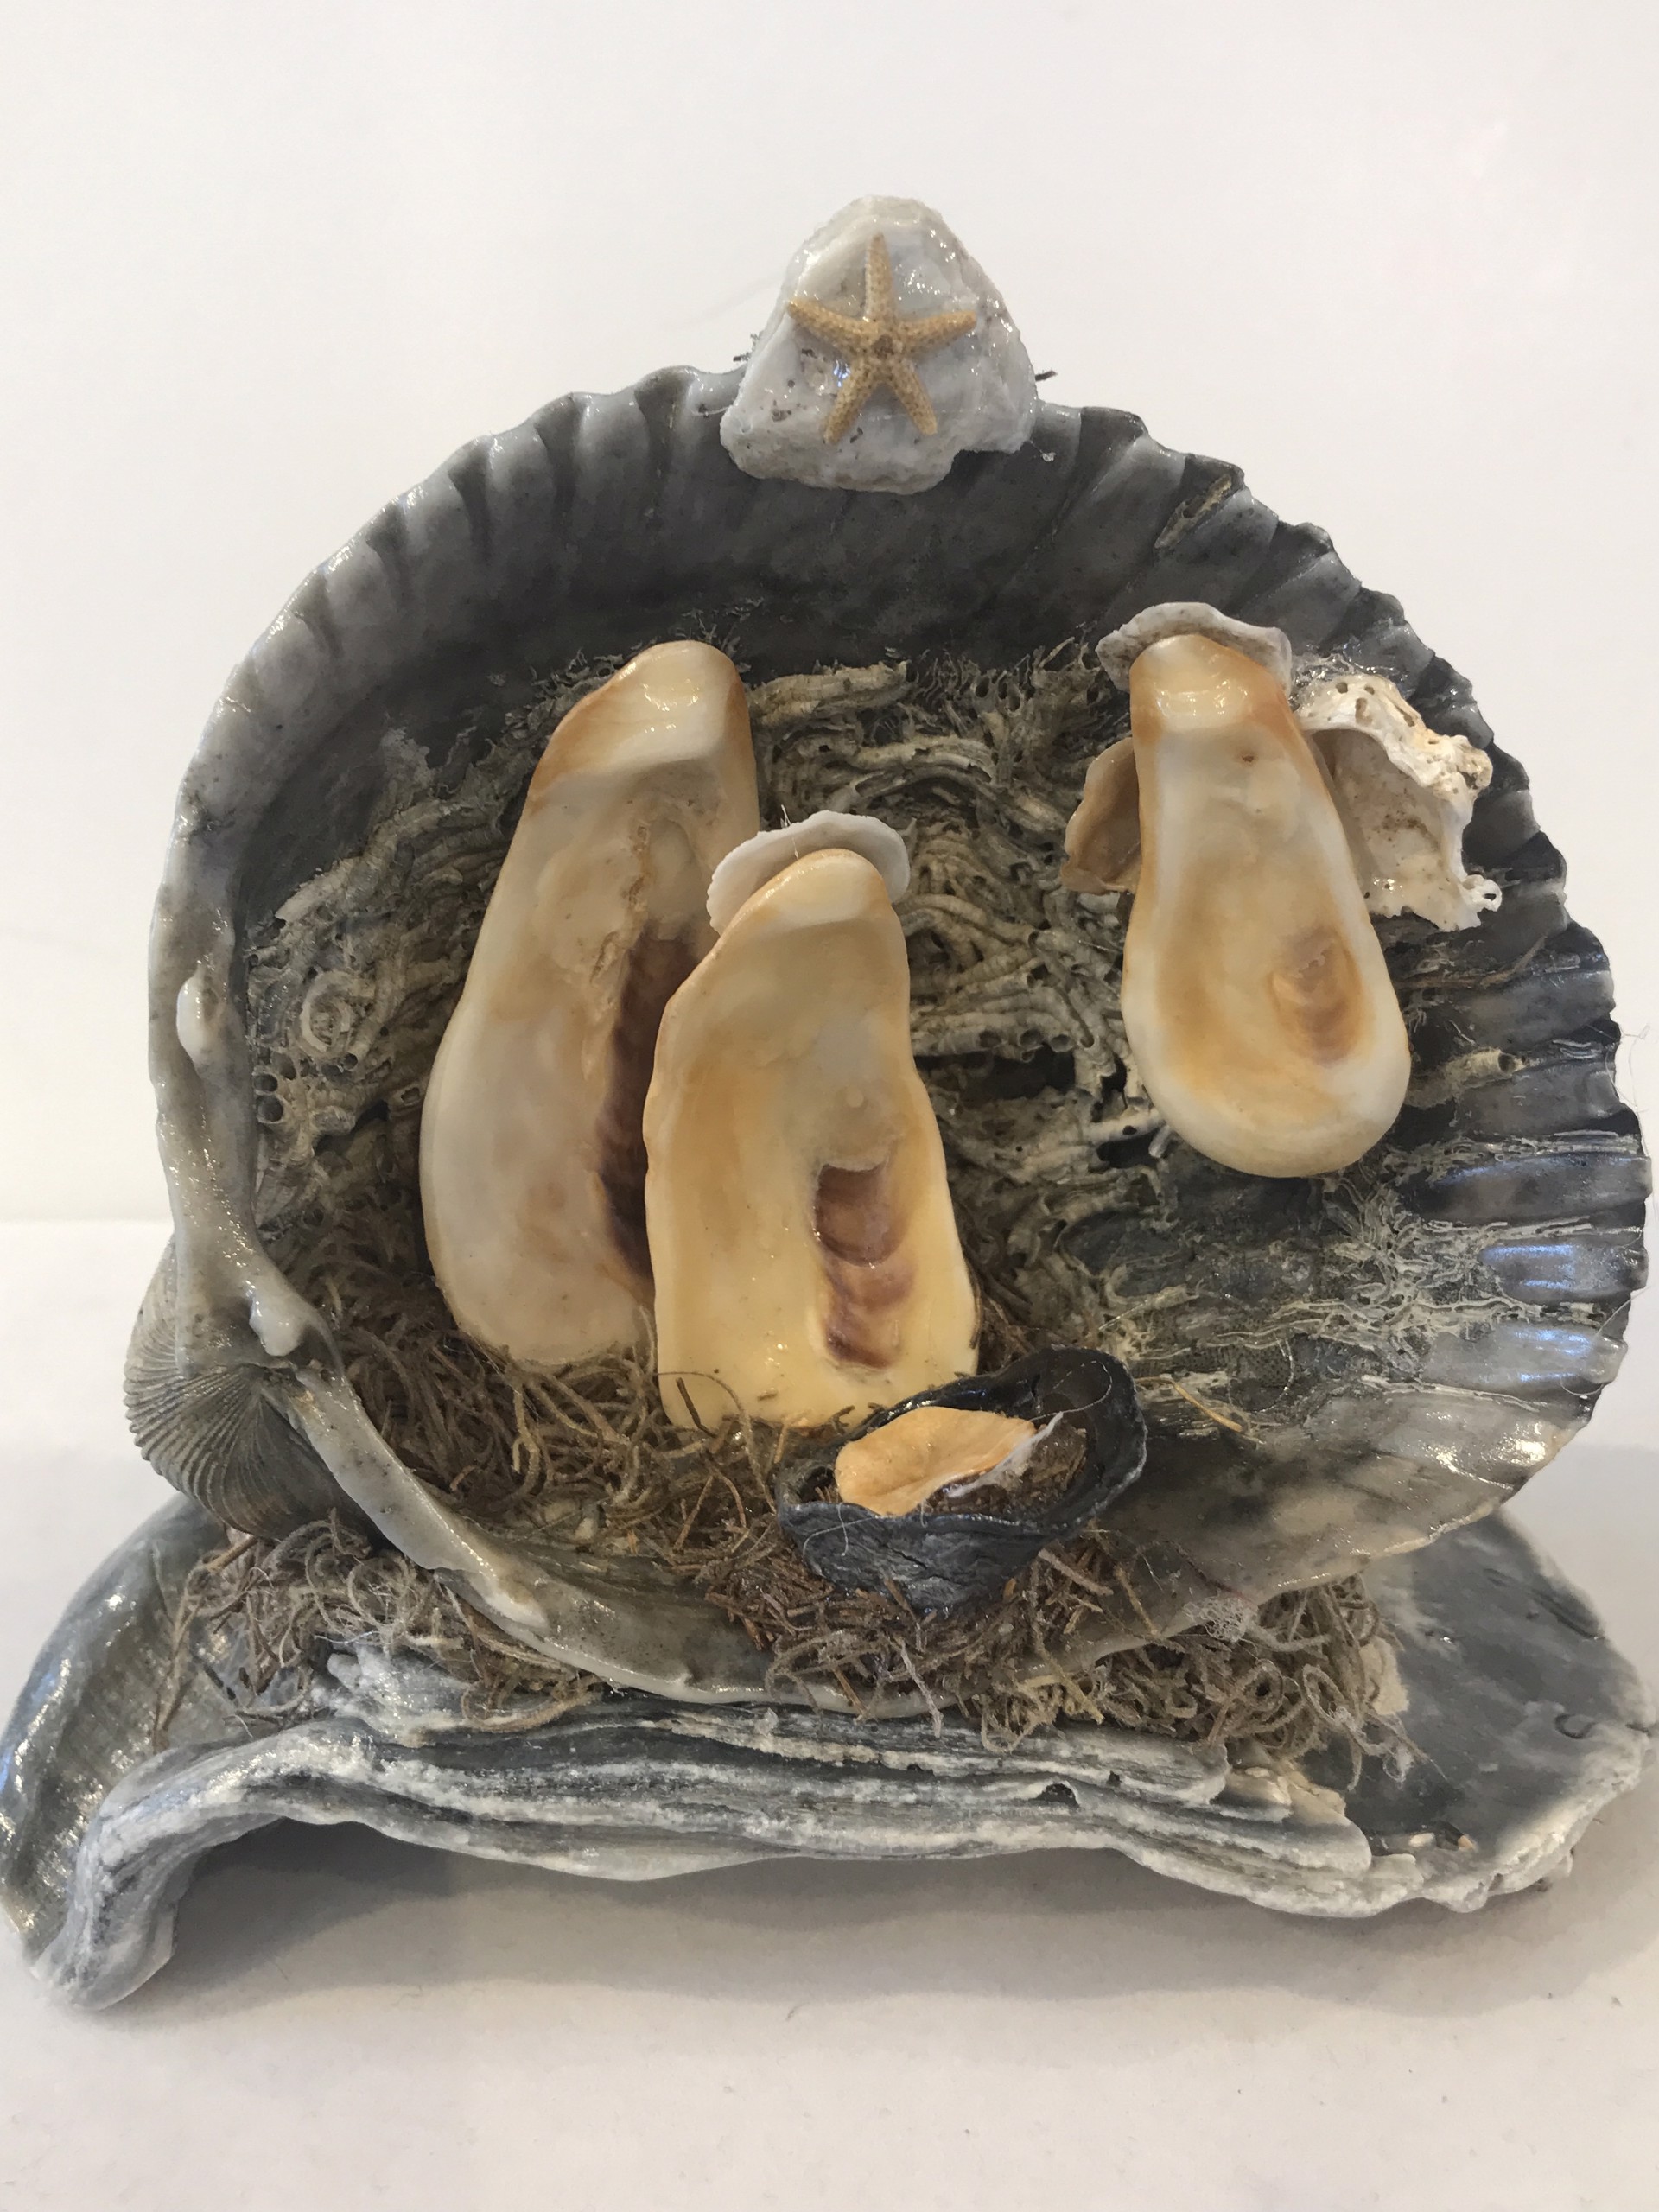 Cockle Shell on Oyster, Creche of the Sea, CN24-03 by Chris Nietert